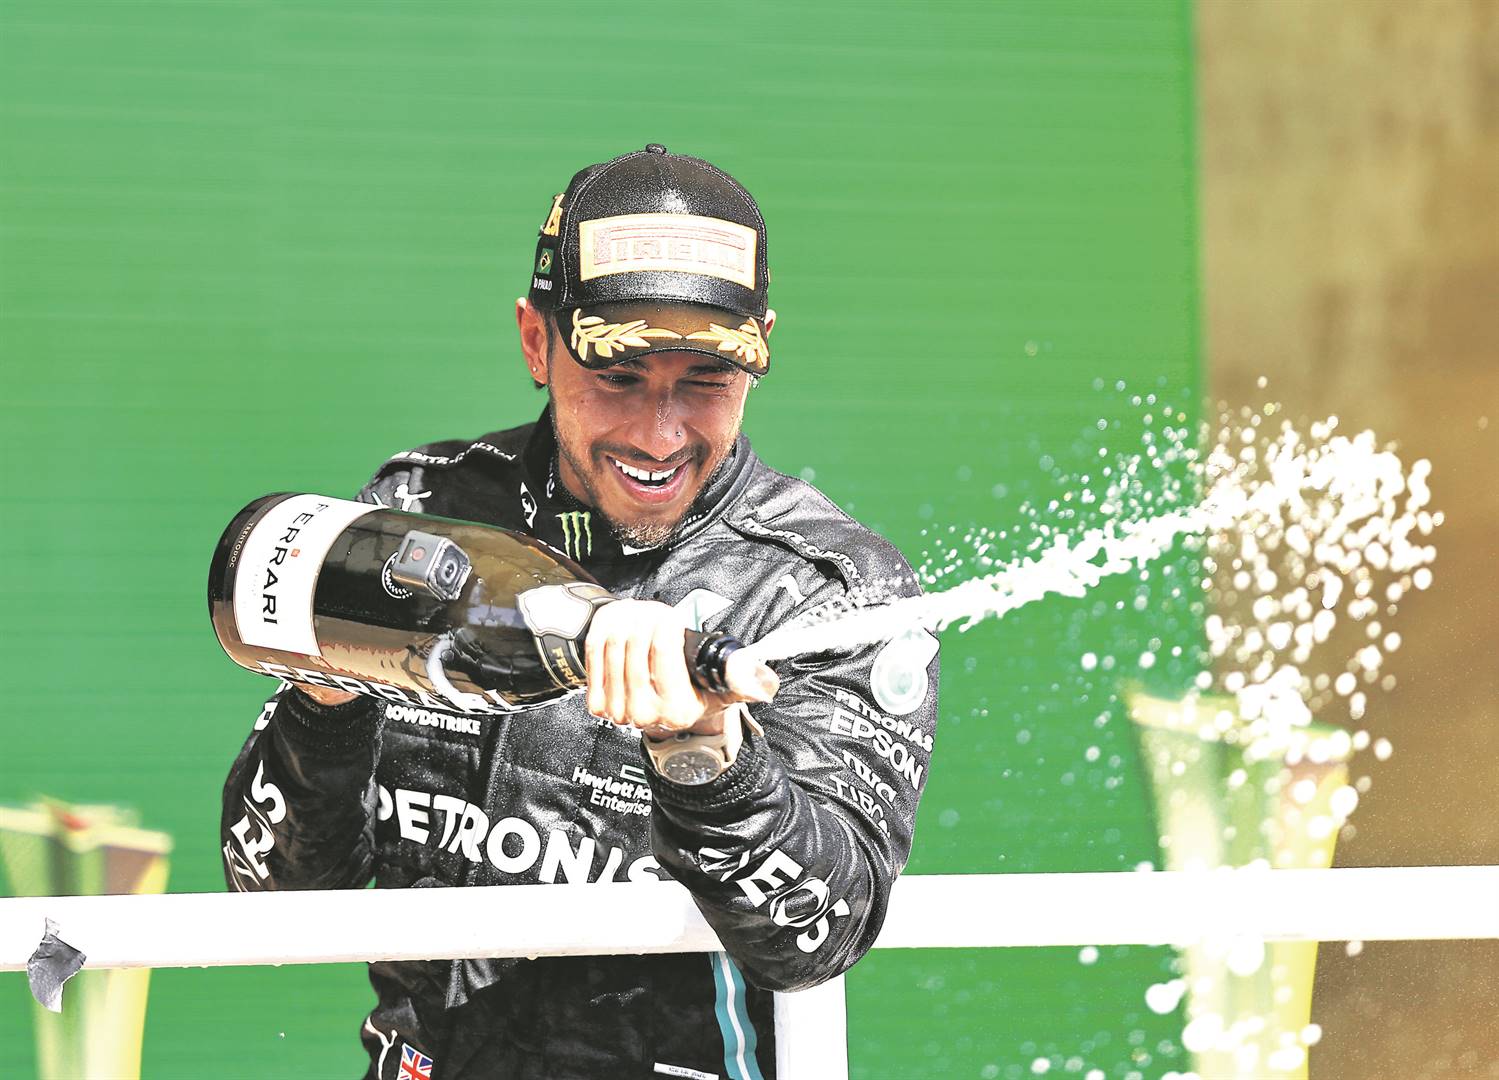 Lewis Hamilton defied the odds to win the Brazilian Grand Prix in Sao Paulo on Sunday Photo: Buda Mendes / Getty Images